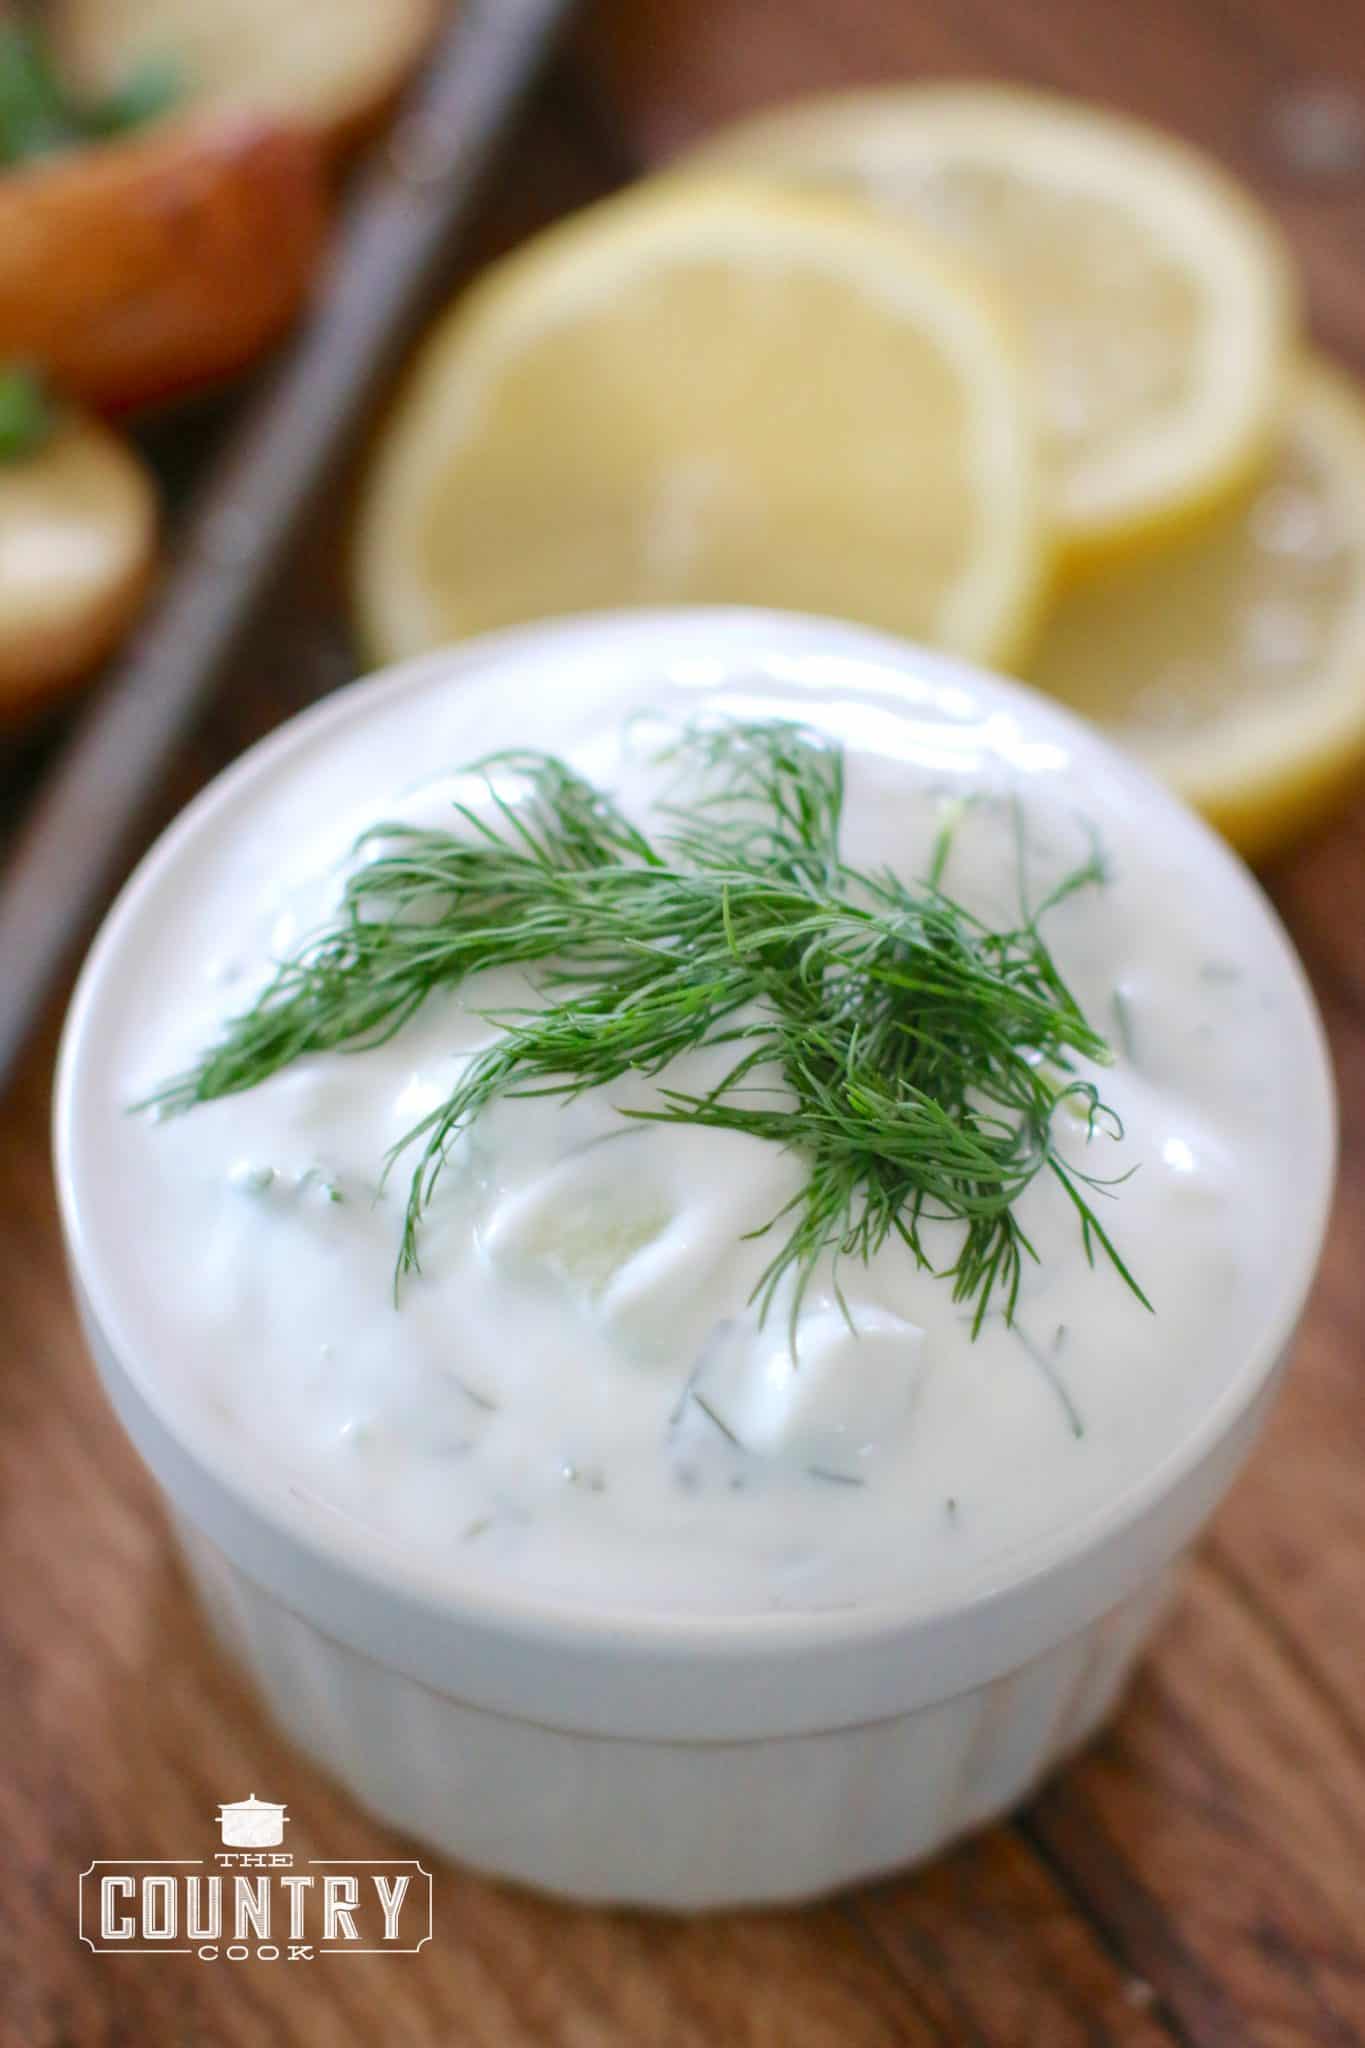 Tzaziki Sauce shown in a small white serving bowl with fresh dill laid on top.